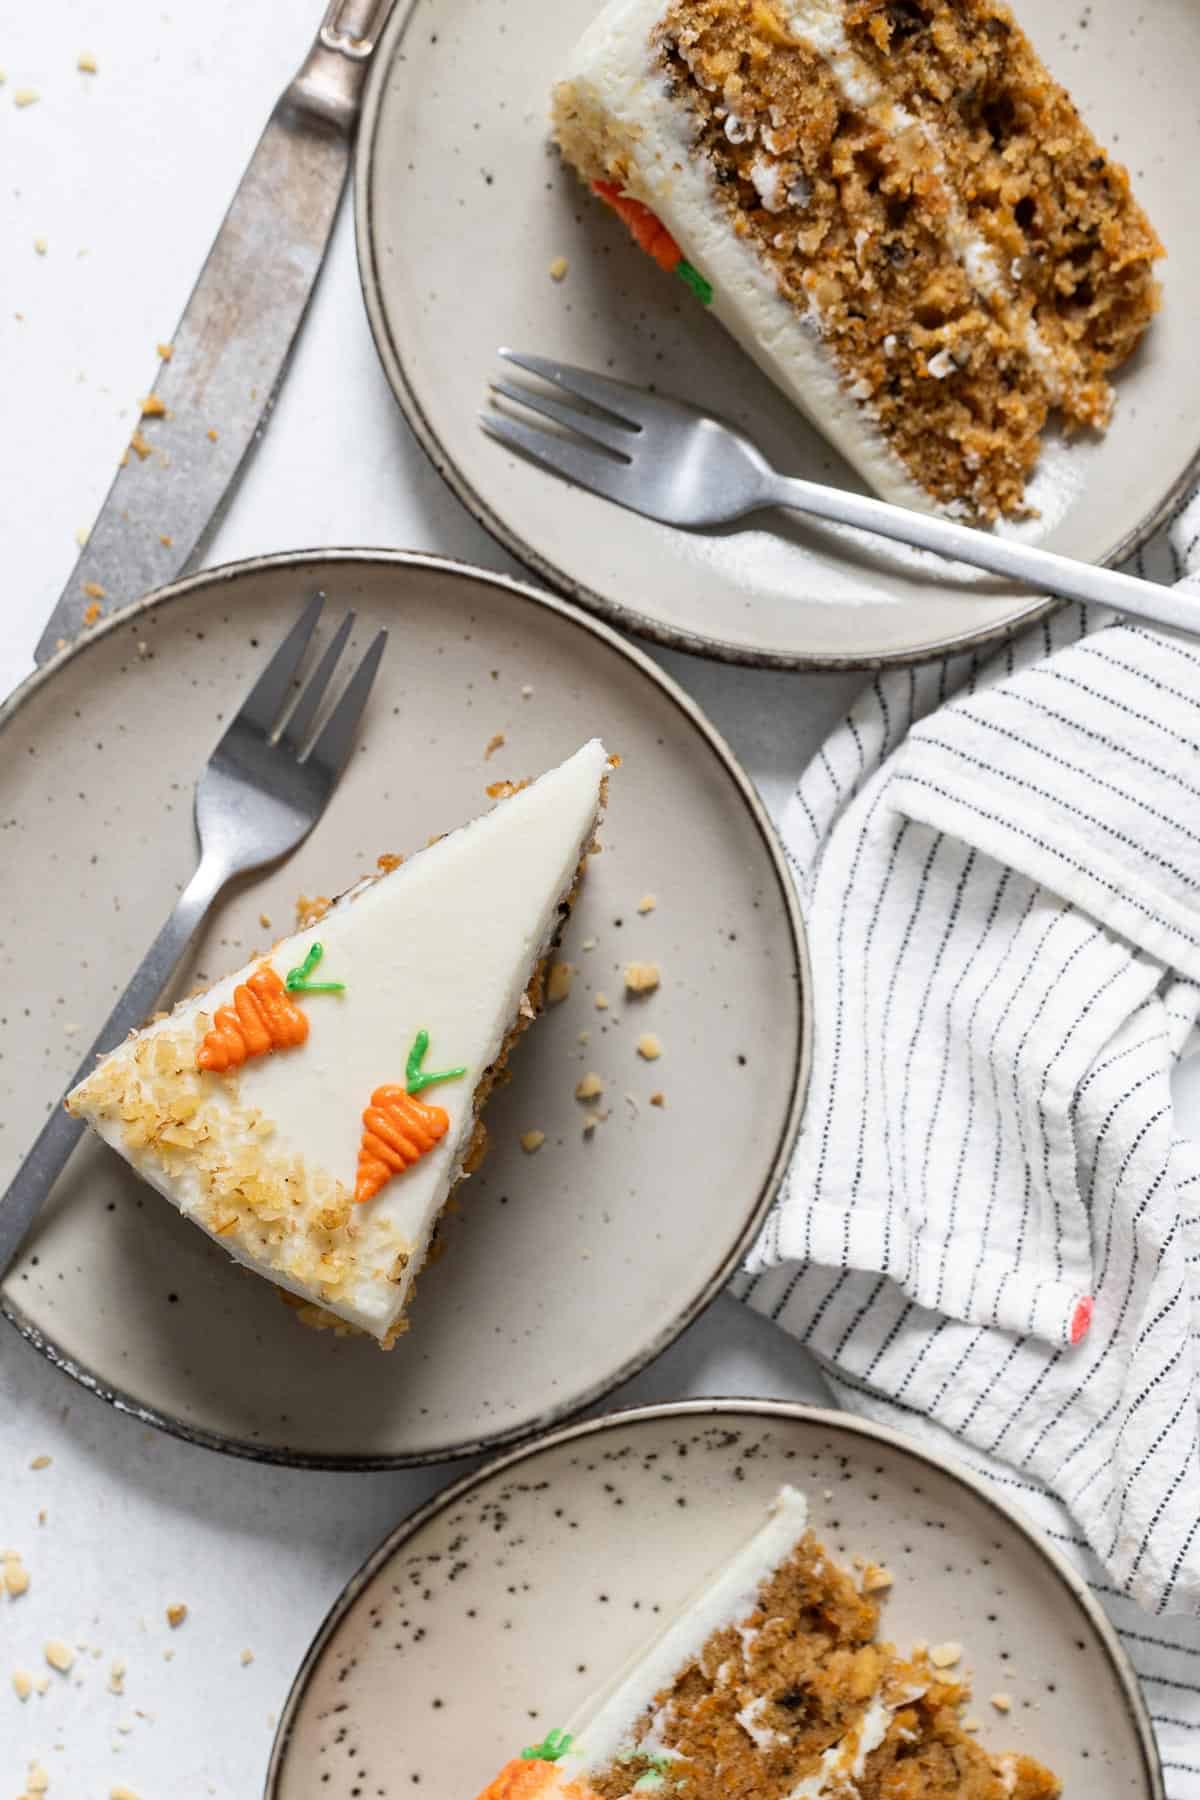 Three portions of carrot cake in plates.